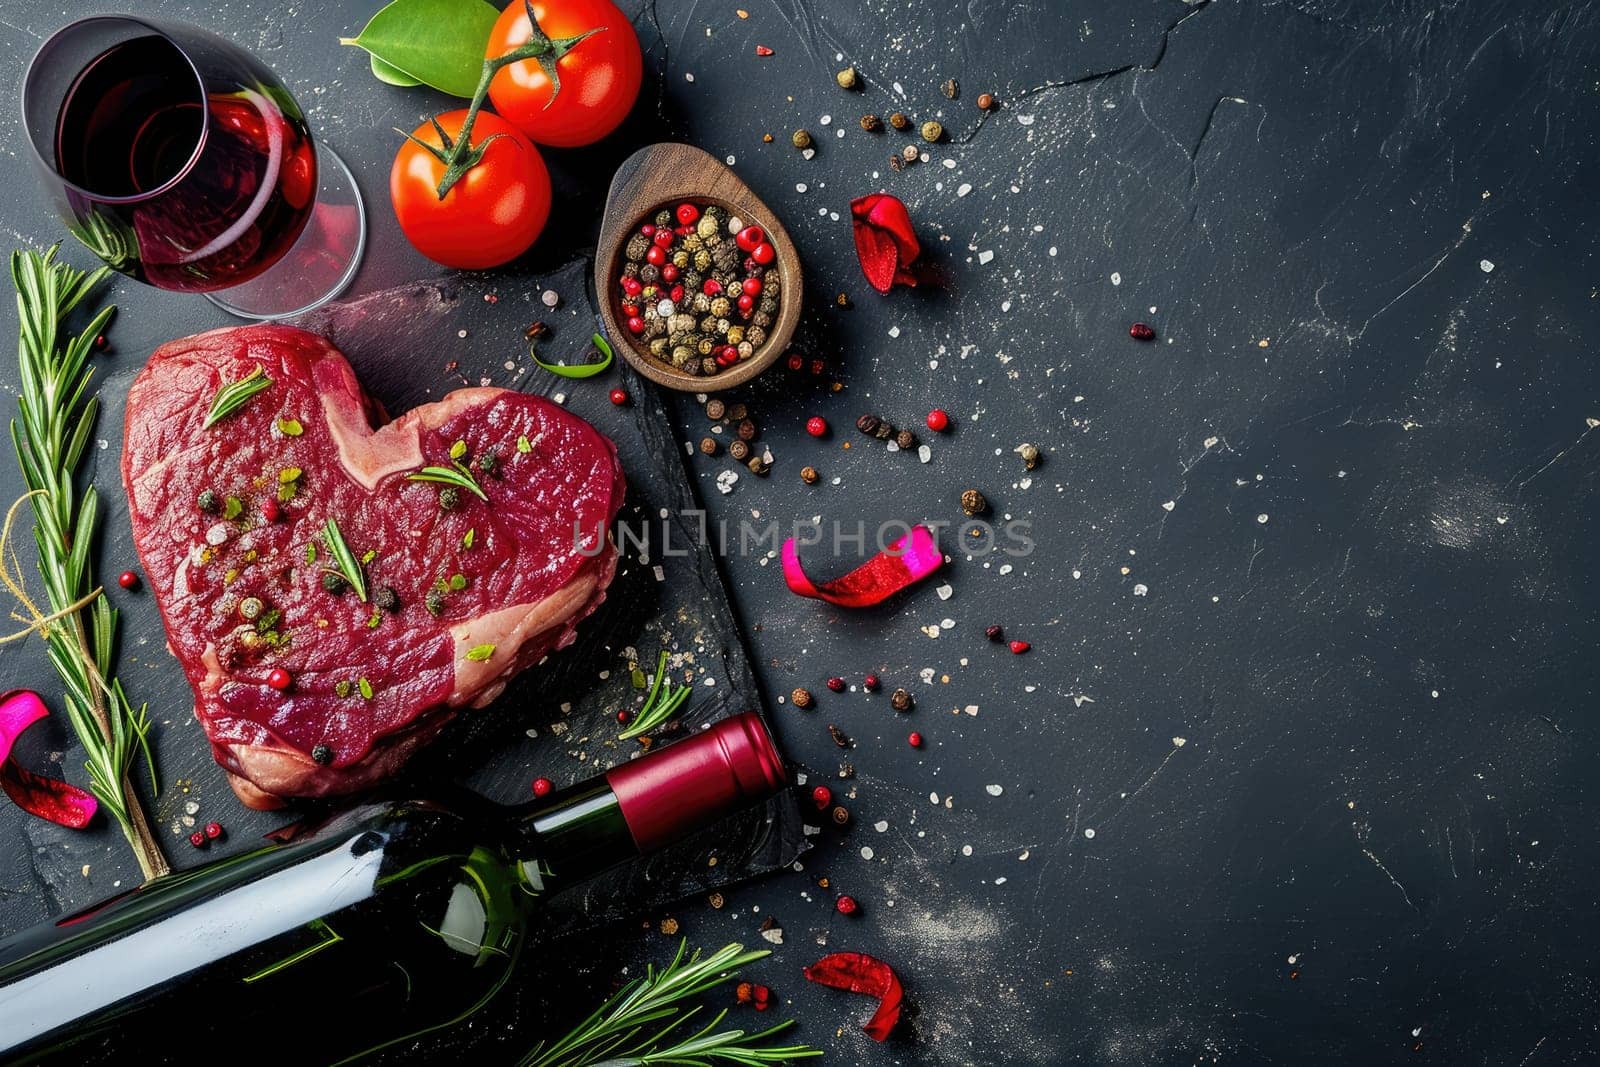 grilled beef steak for valentines day pragma by biancoblue